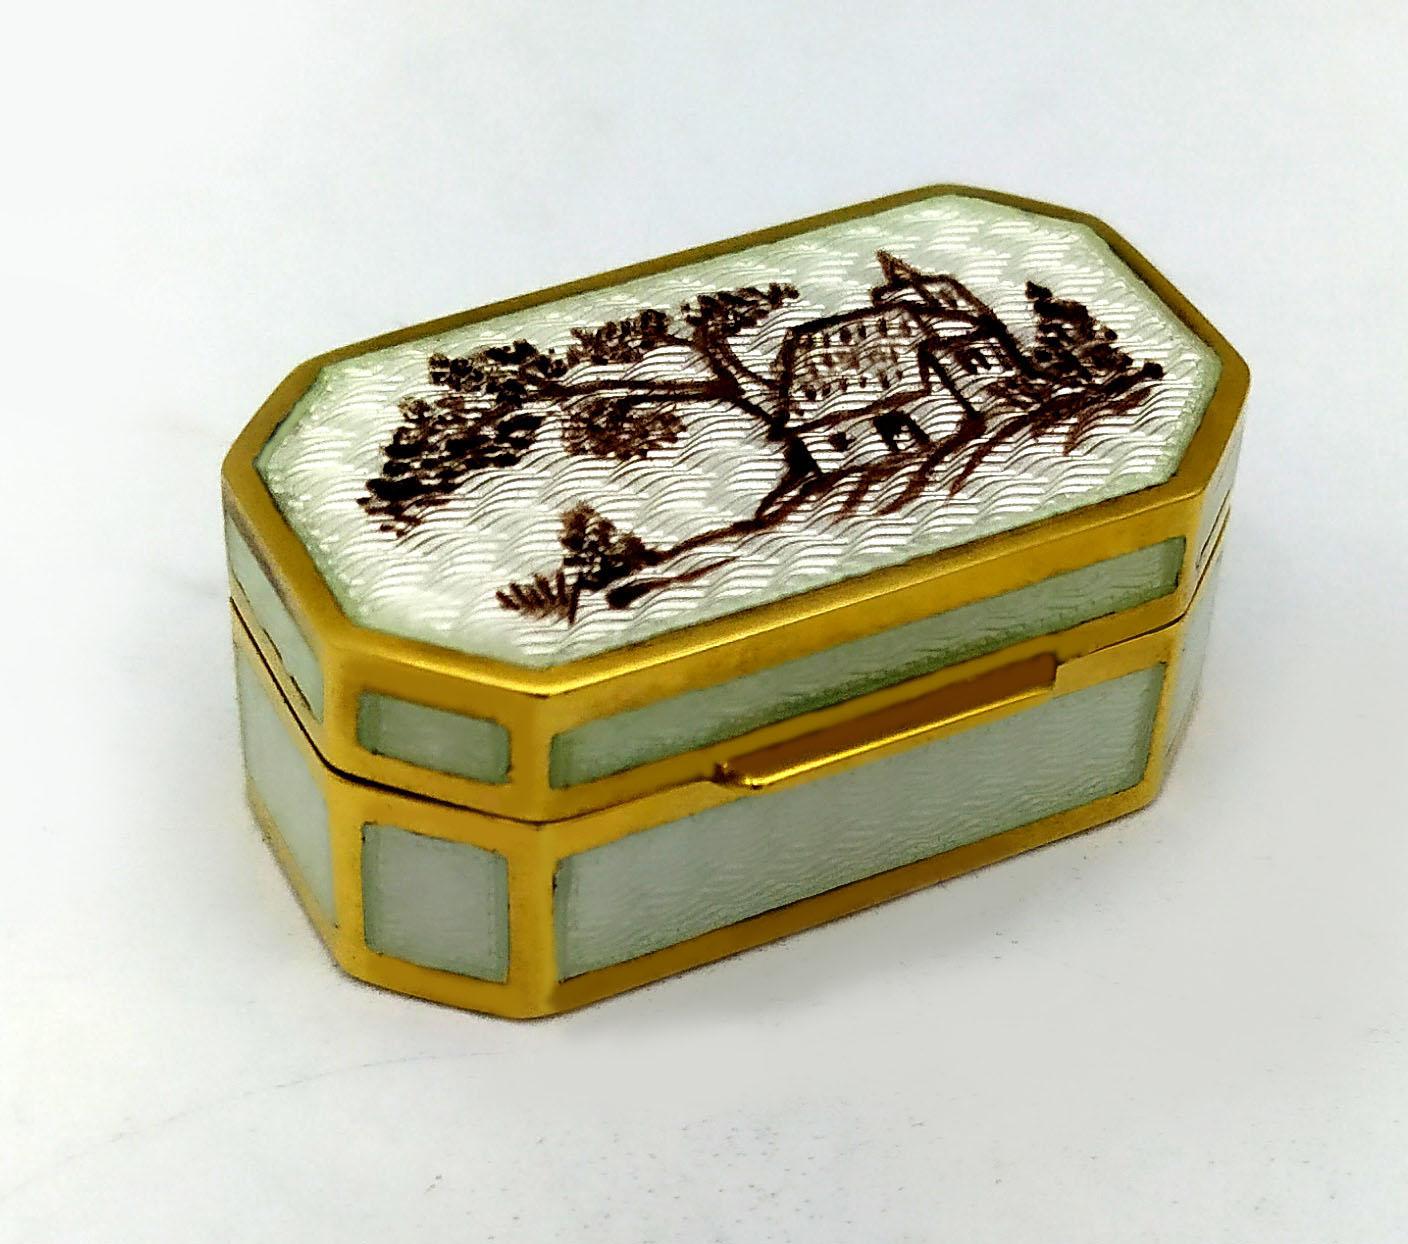 Octagonal pillbox in 925/1000 sterling silver gold plated with translucent fired asu guillochè enamel also on all sides and monochrome hand-painted miniature on the lid. Dimensions cm. 4 x 2.3 x 1.8. Weight gr. 36. Designed by Franco Salimbeni in